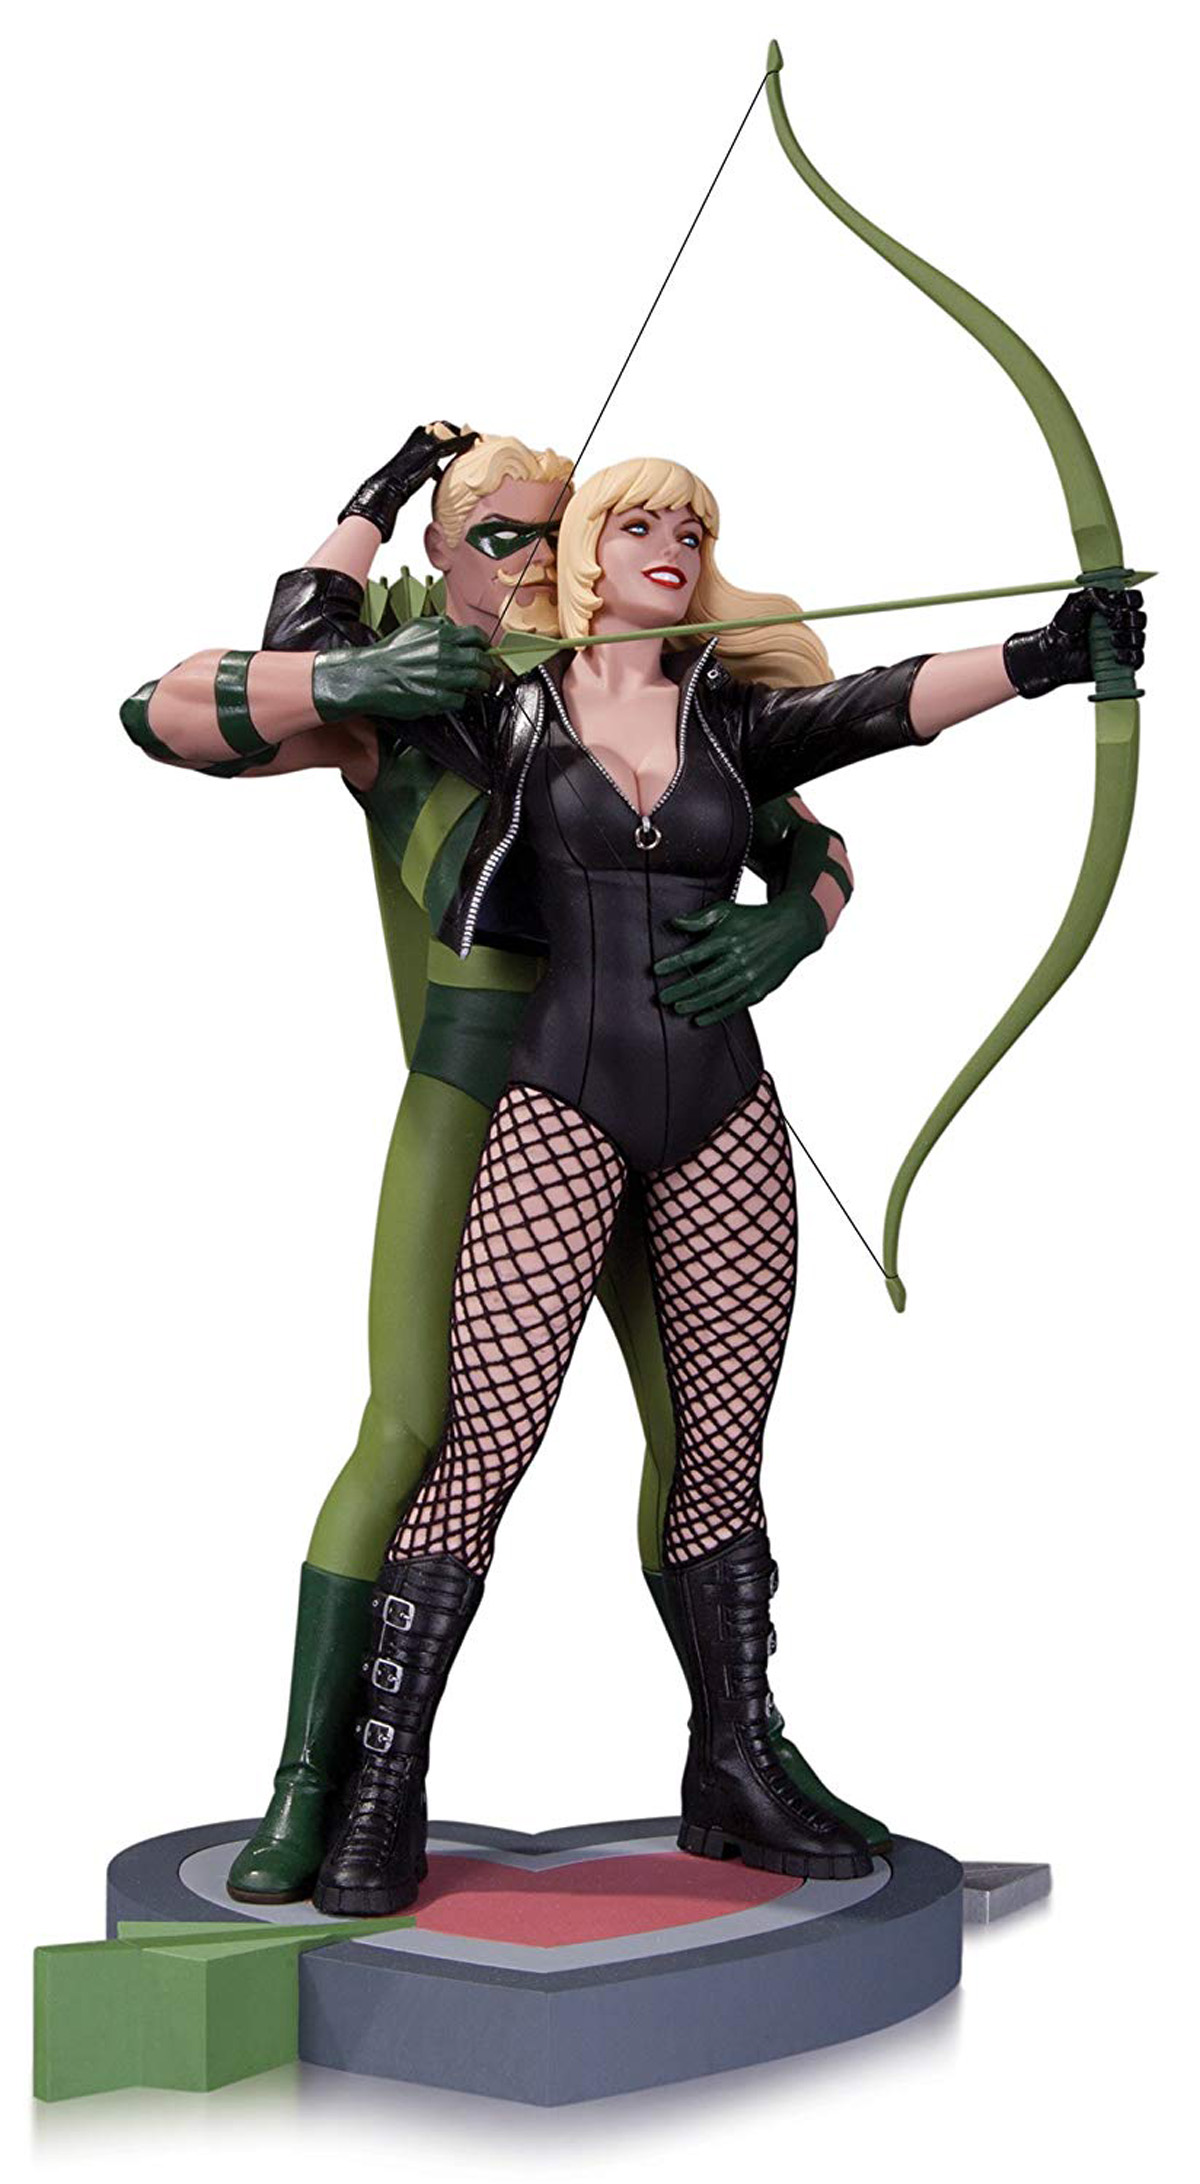 #14. Green Arrow and Black Canary by Cliff Chiang